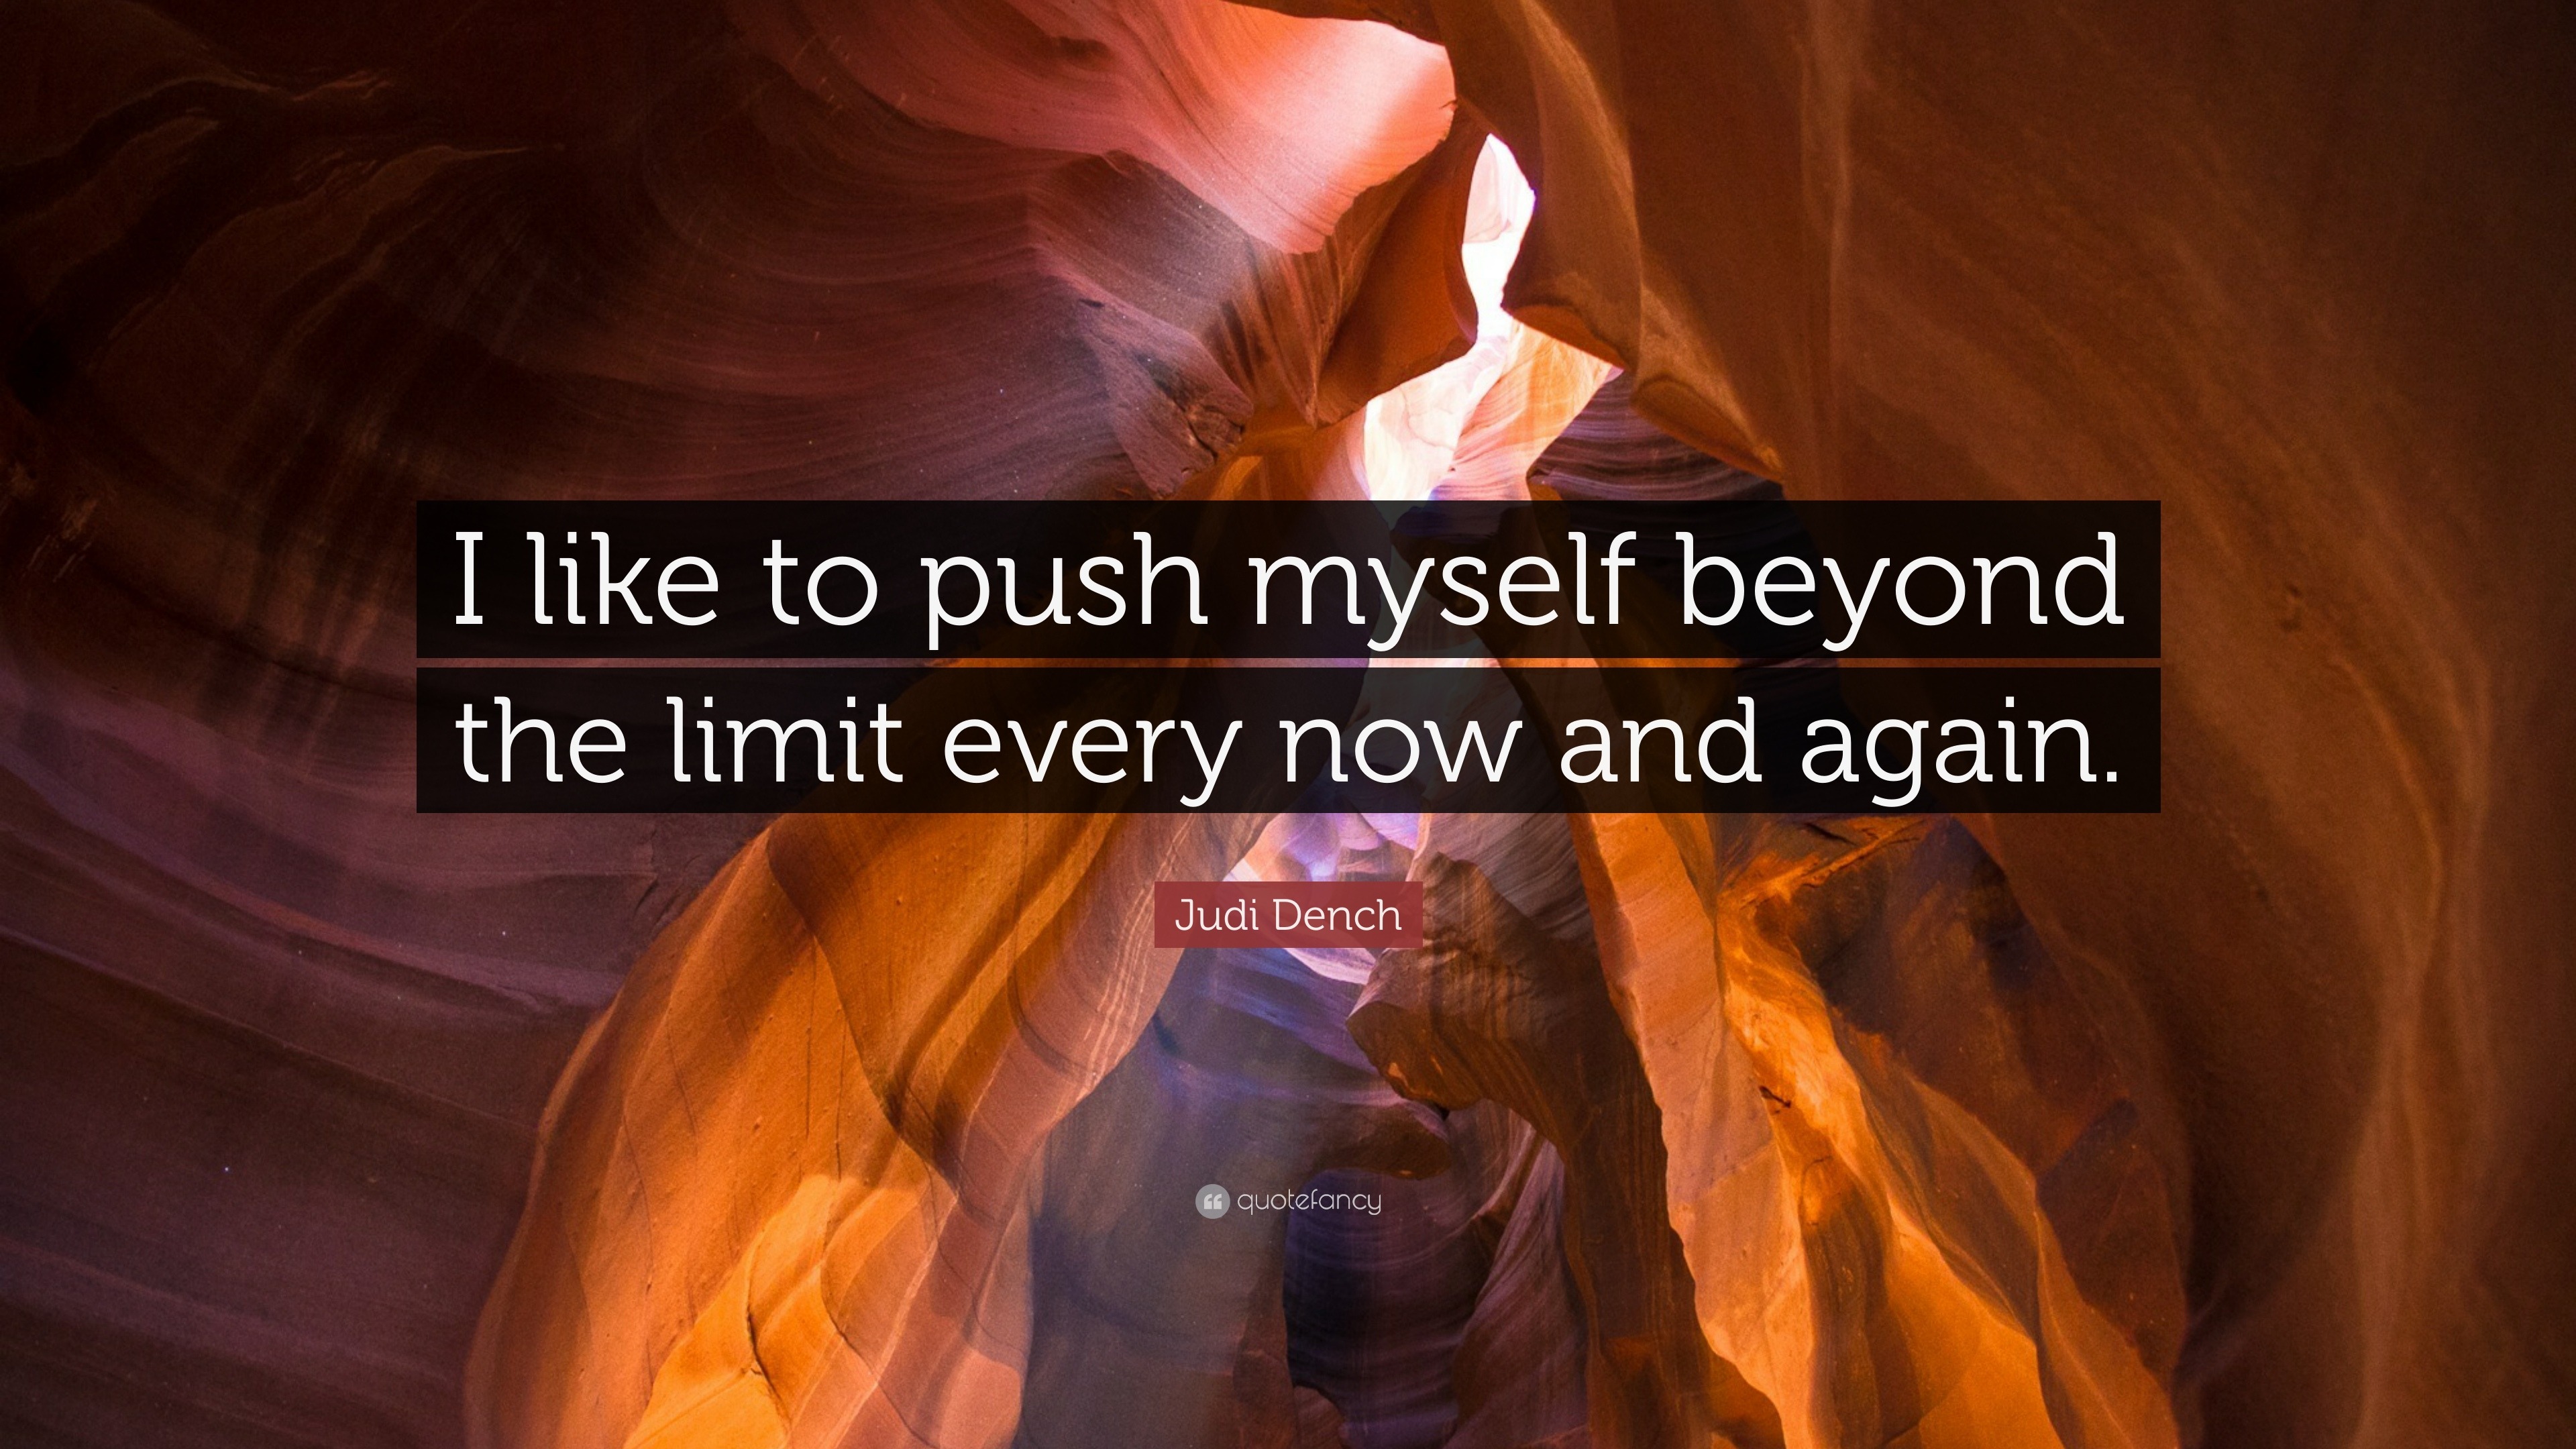 Judi Dench Quote: “I like to push myself beyond the limit every now and  again.”